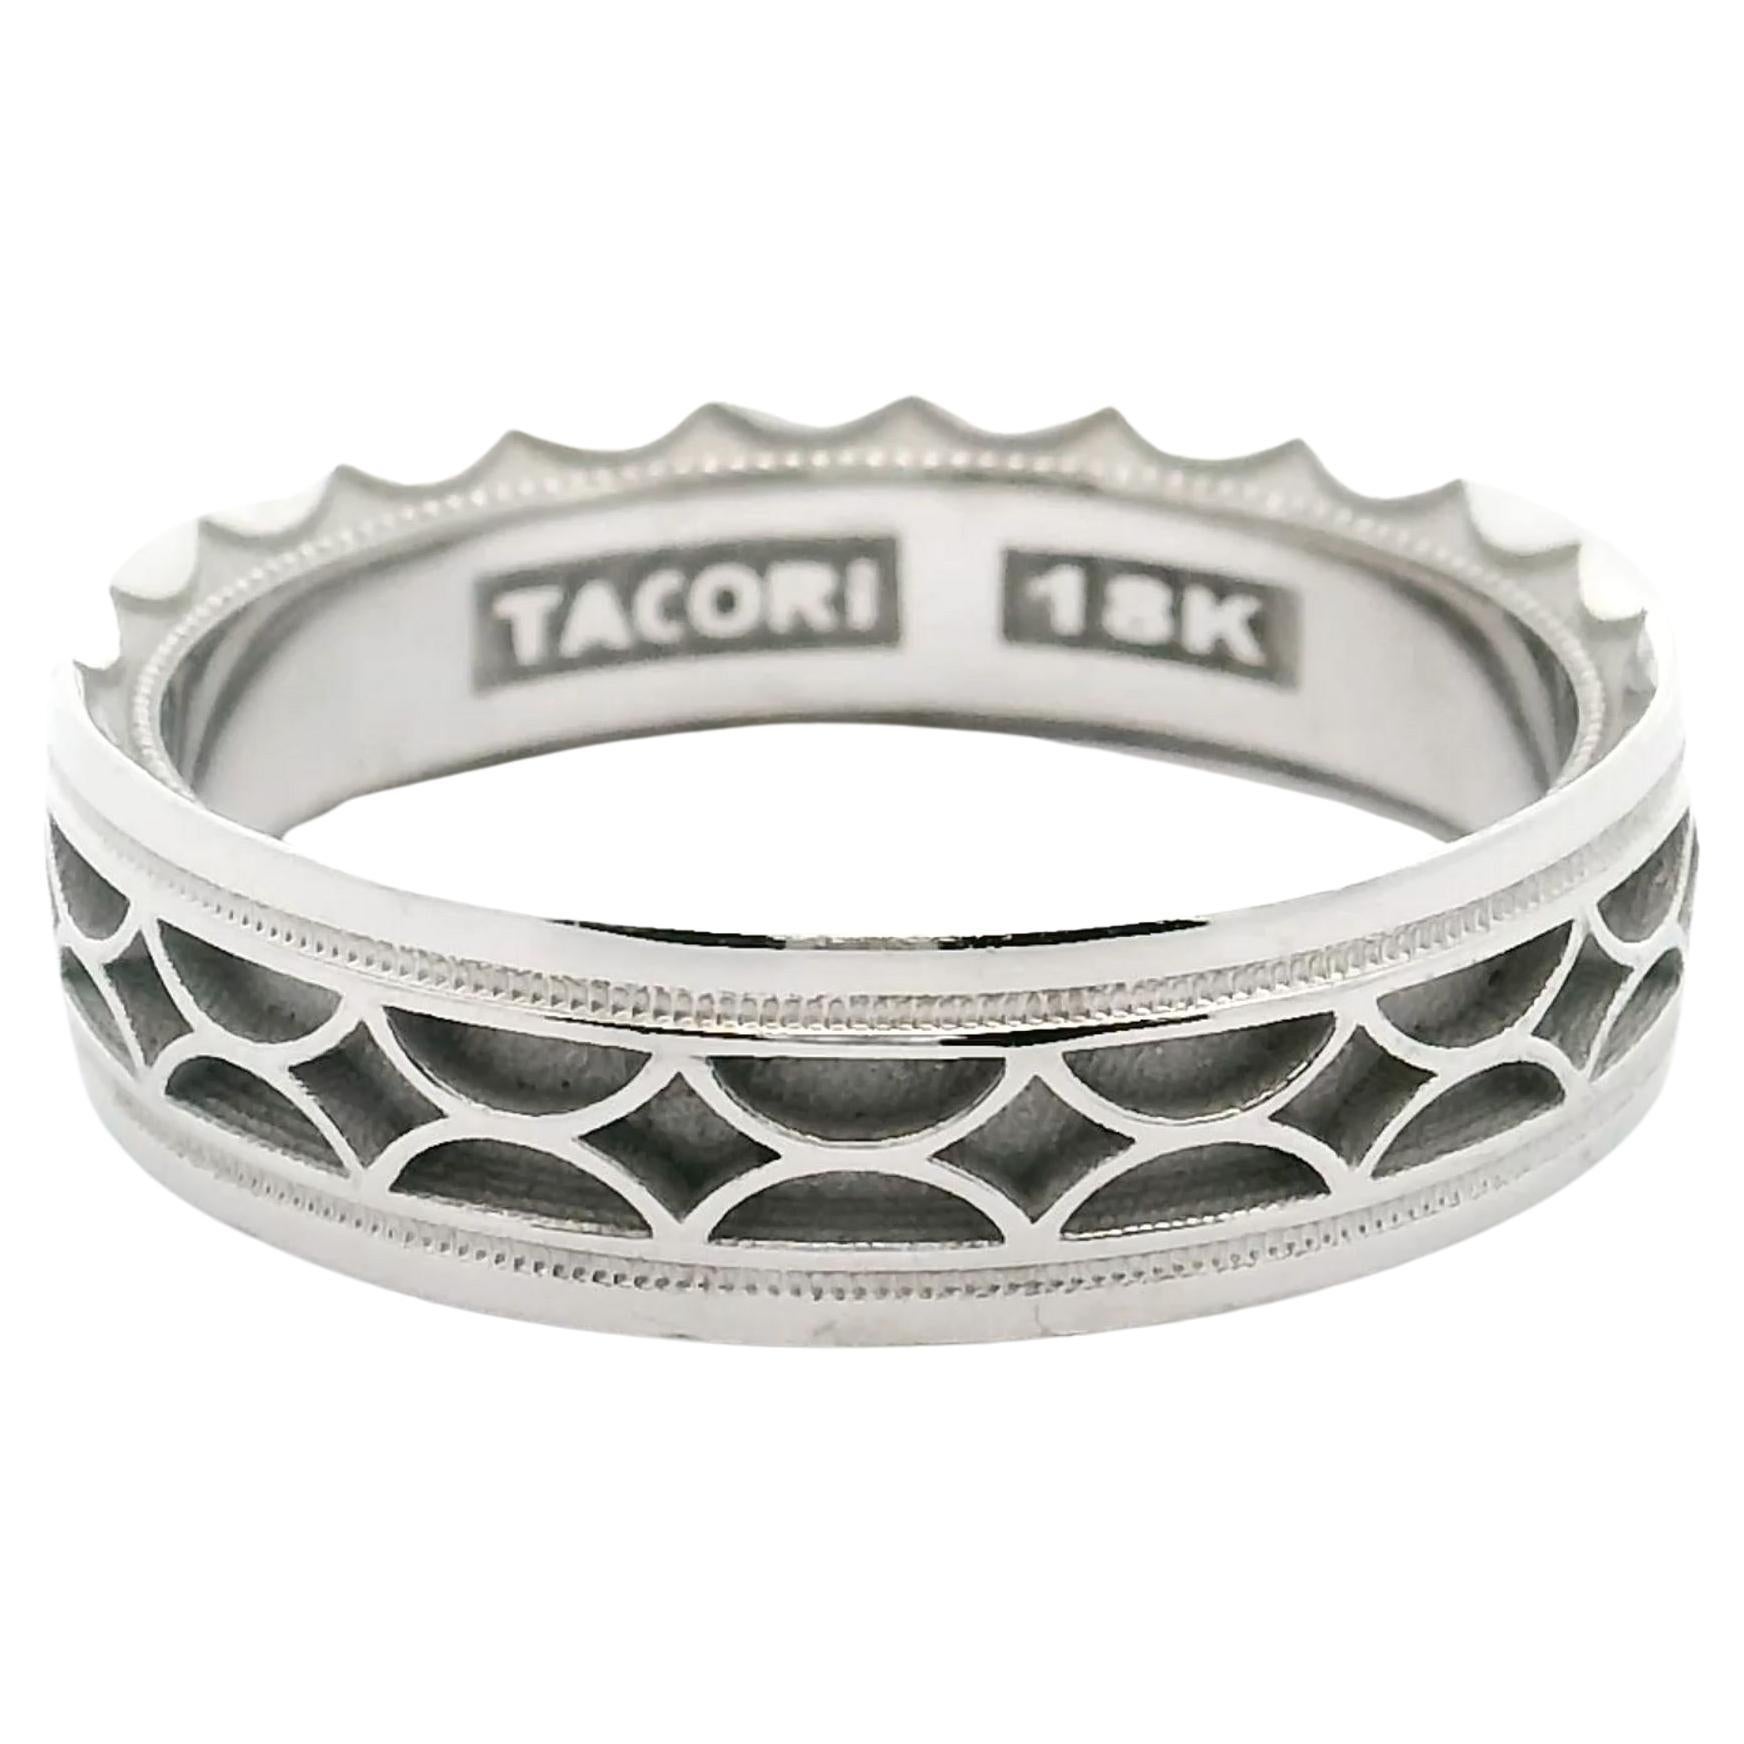 Tacori 113-6W Men's Wedding Band, 18K White Gold, Brushed and High Polish, 6mm For Sale